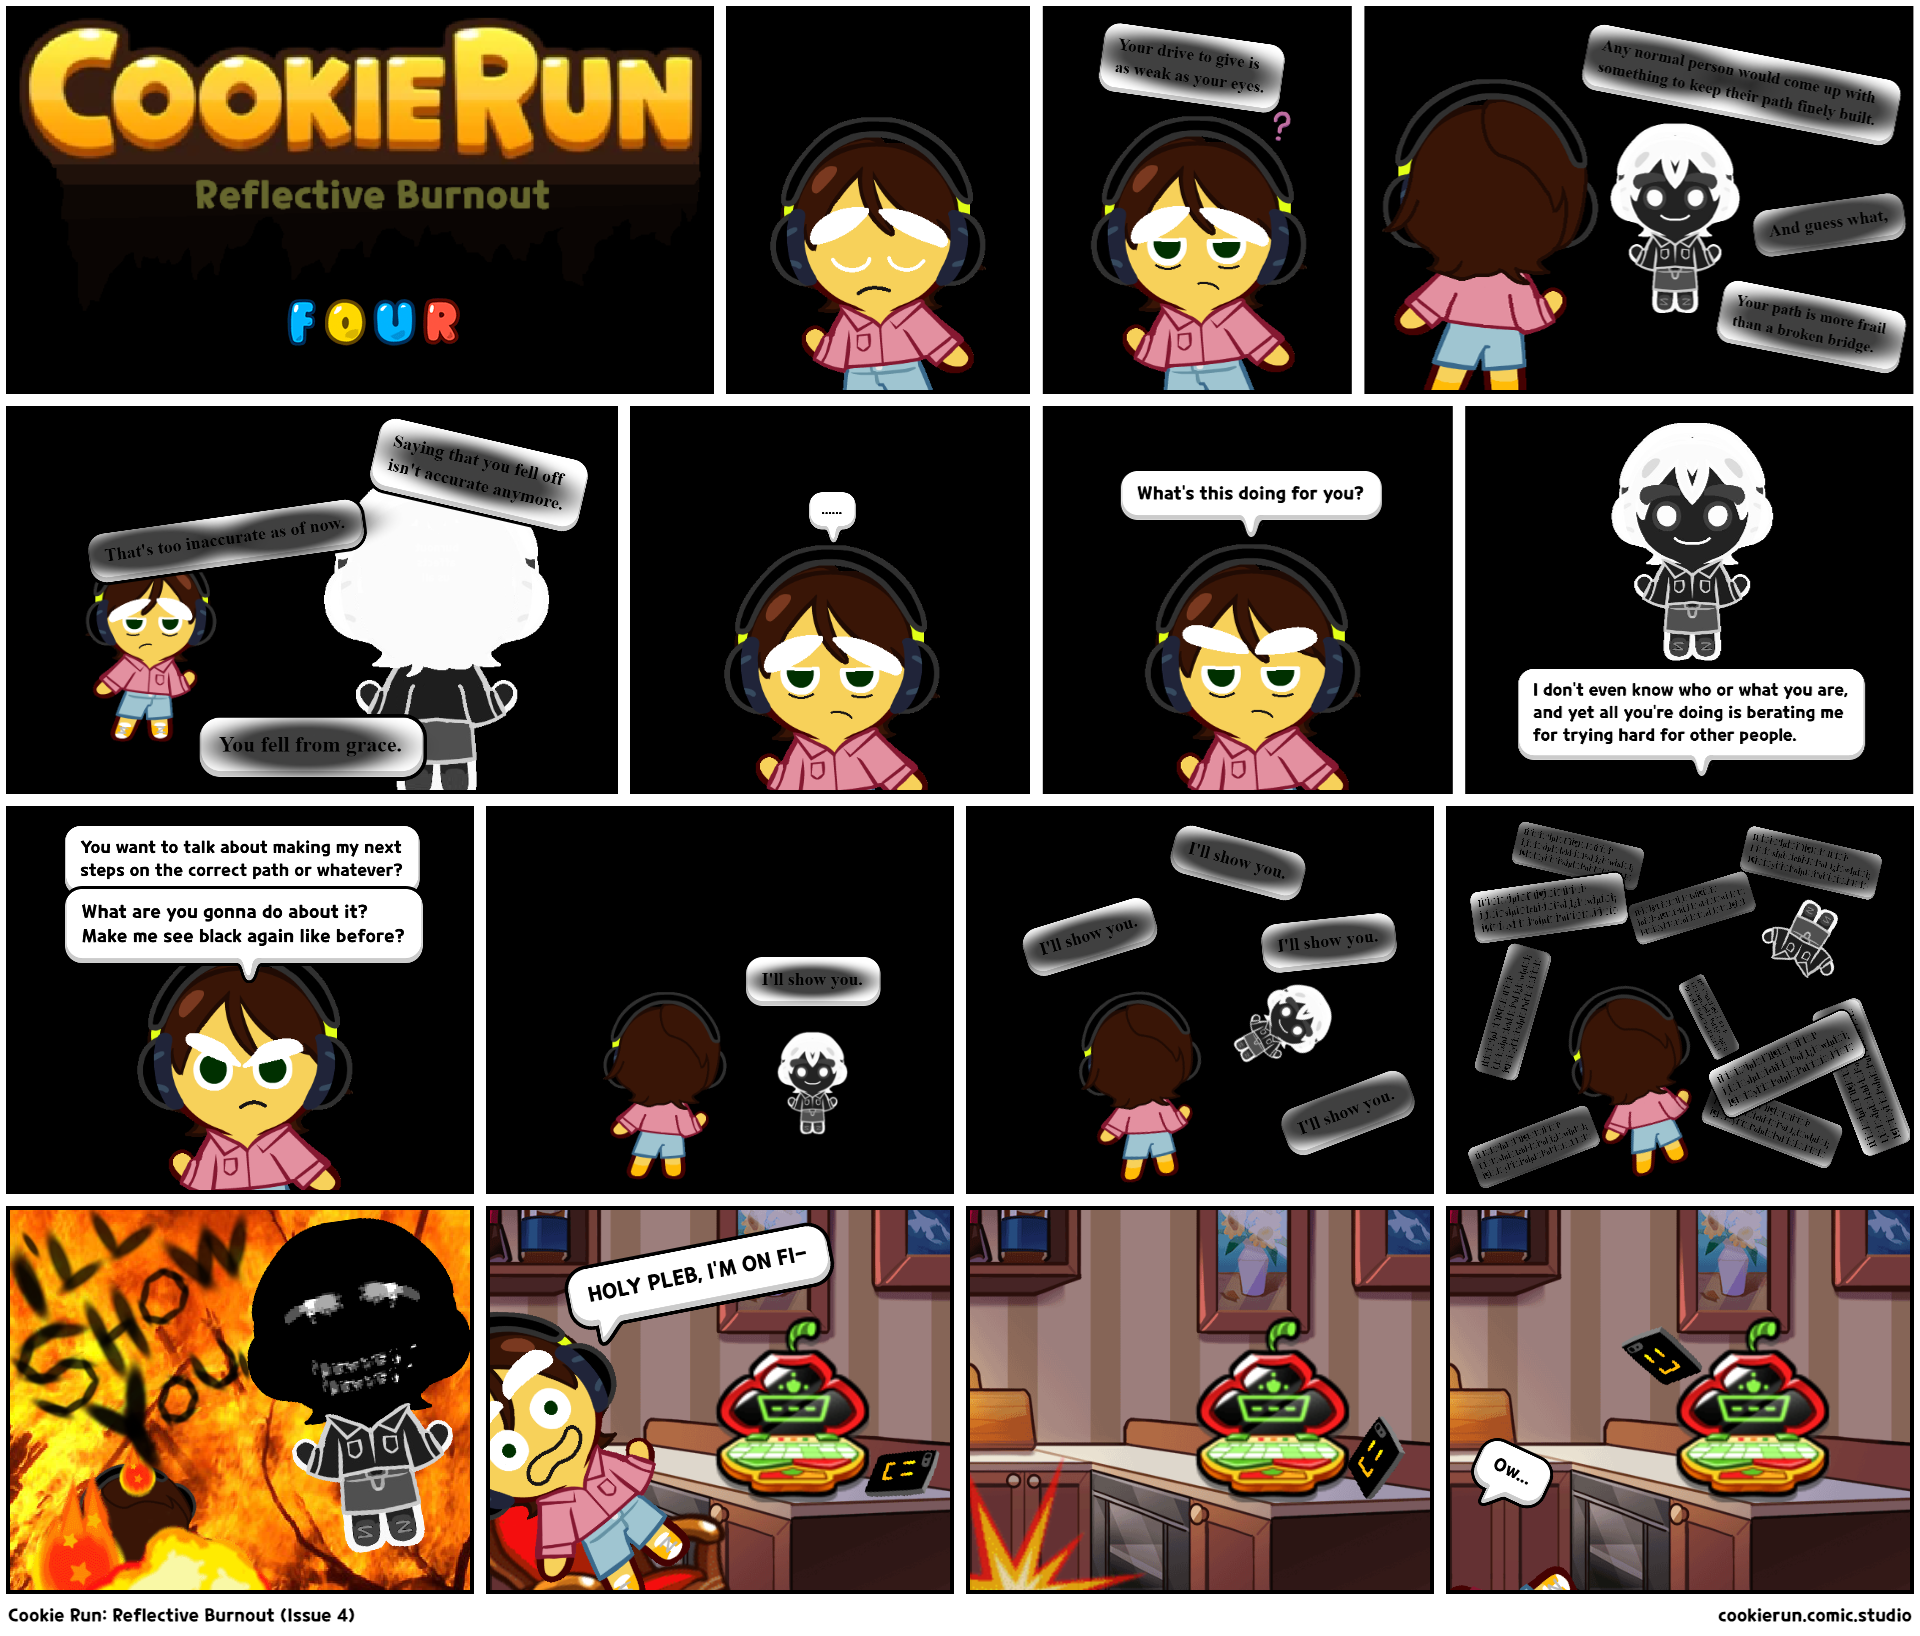 Cookie Run: Reflective Burnout (Issue 4)